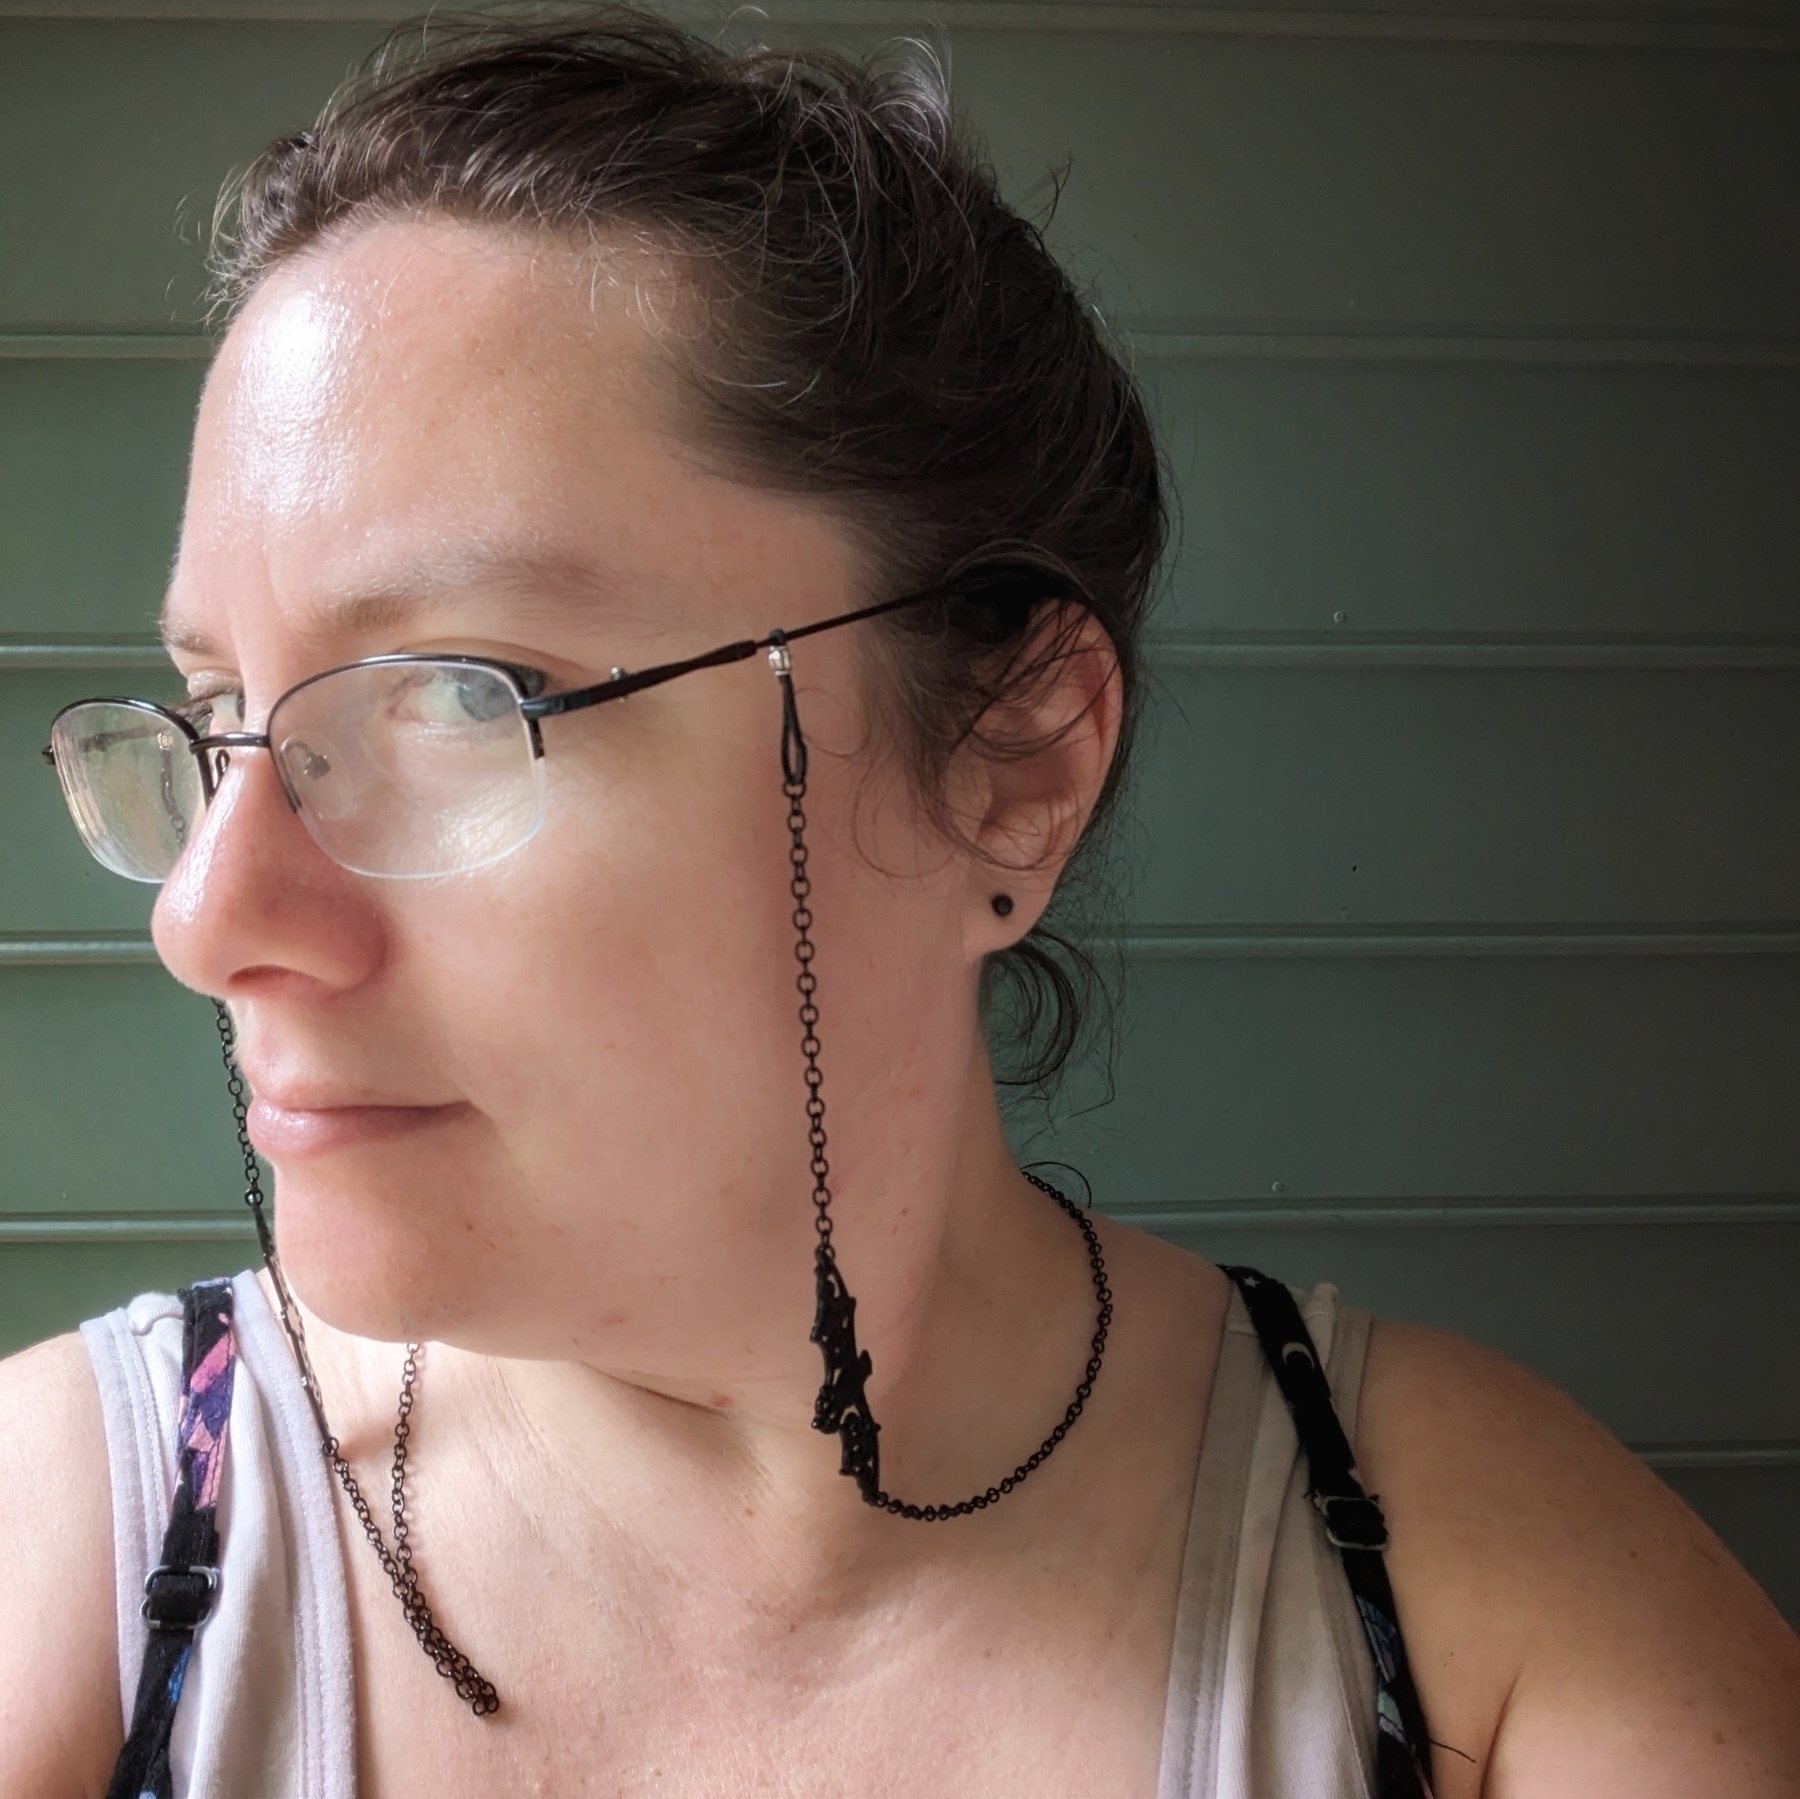 A woman wears glasses with a glasses chain. There is a bat charm in the middle of the glasses chain.